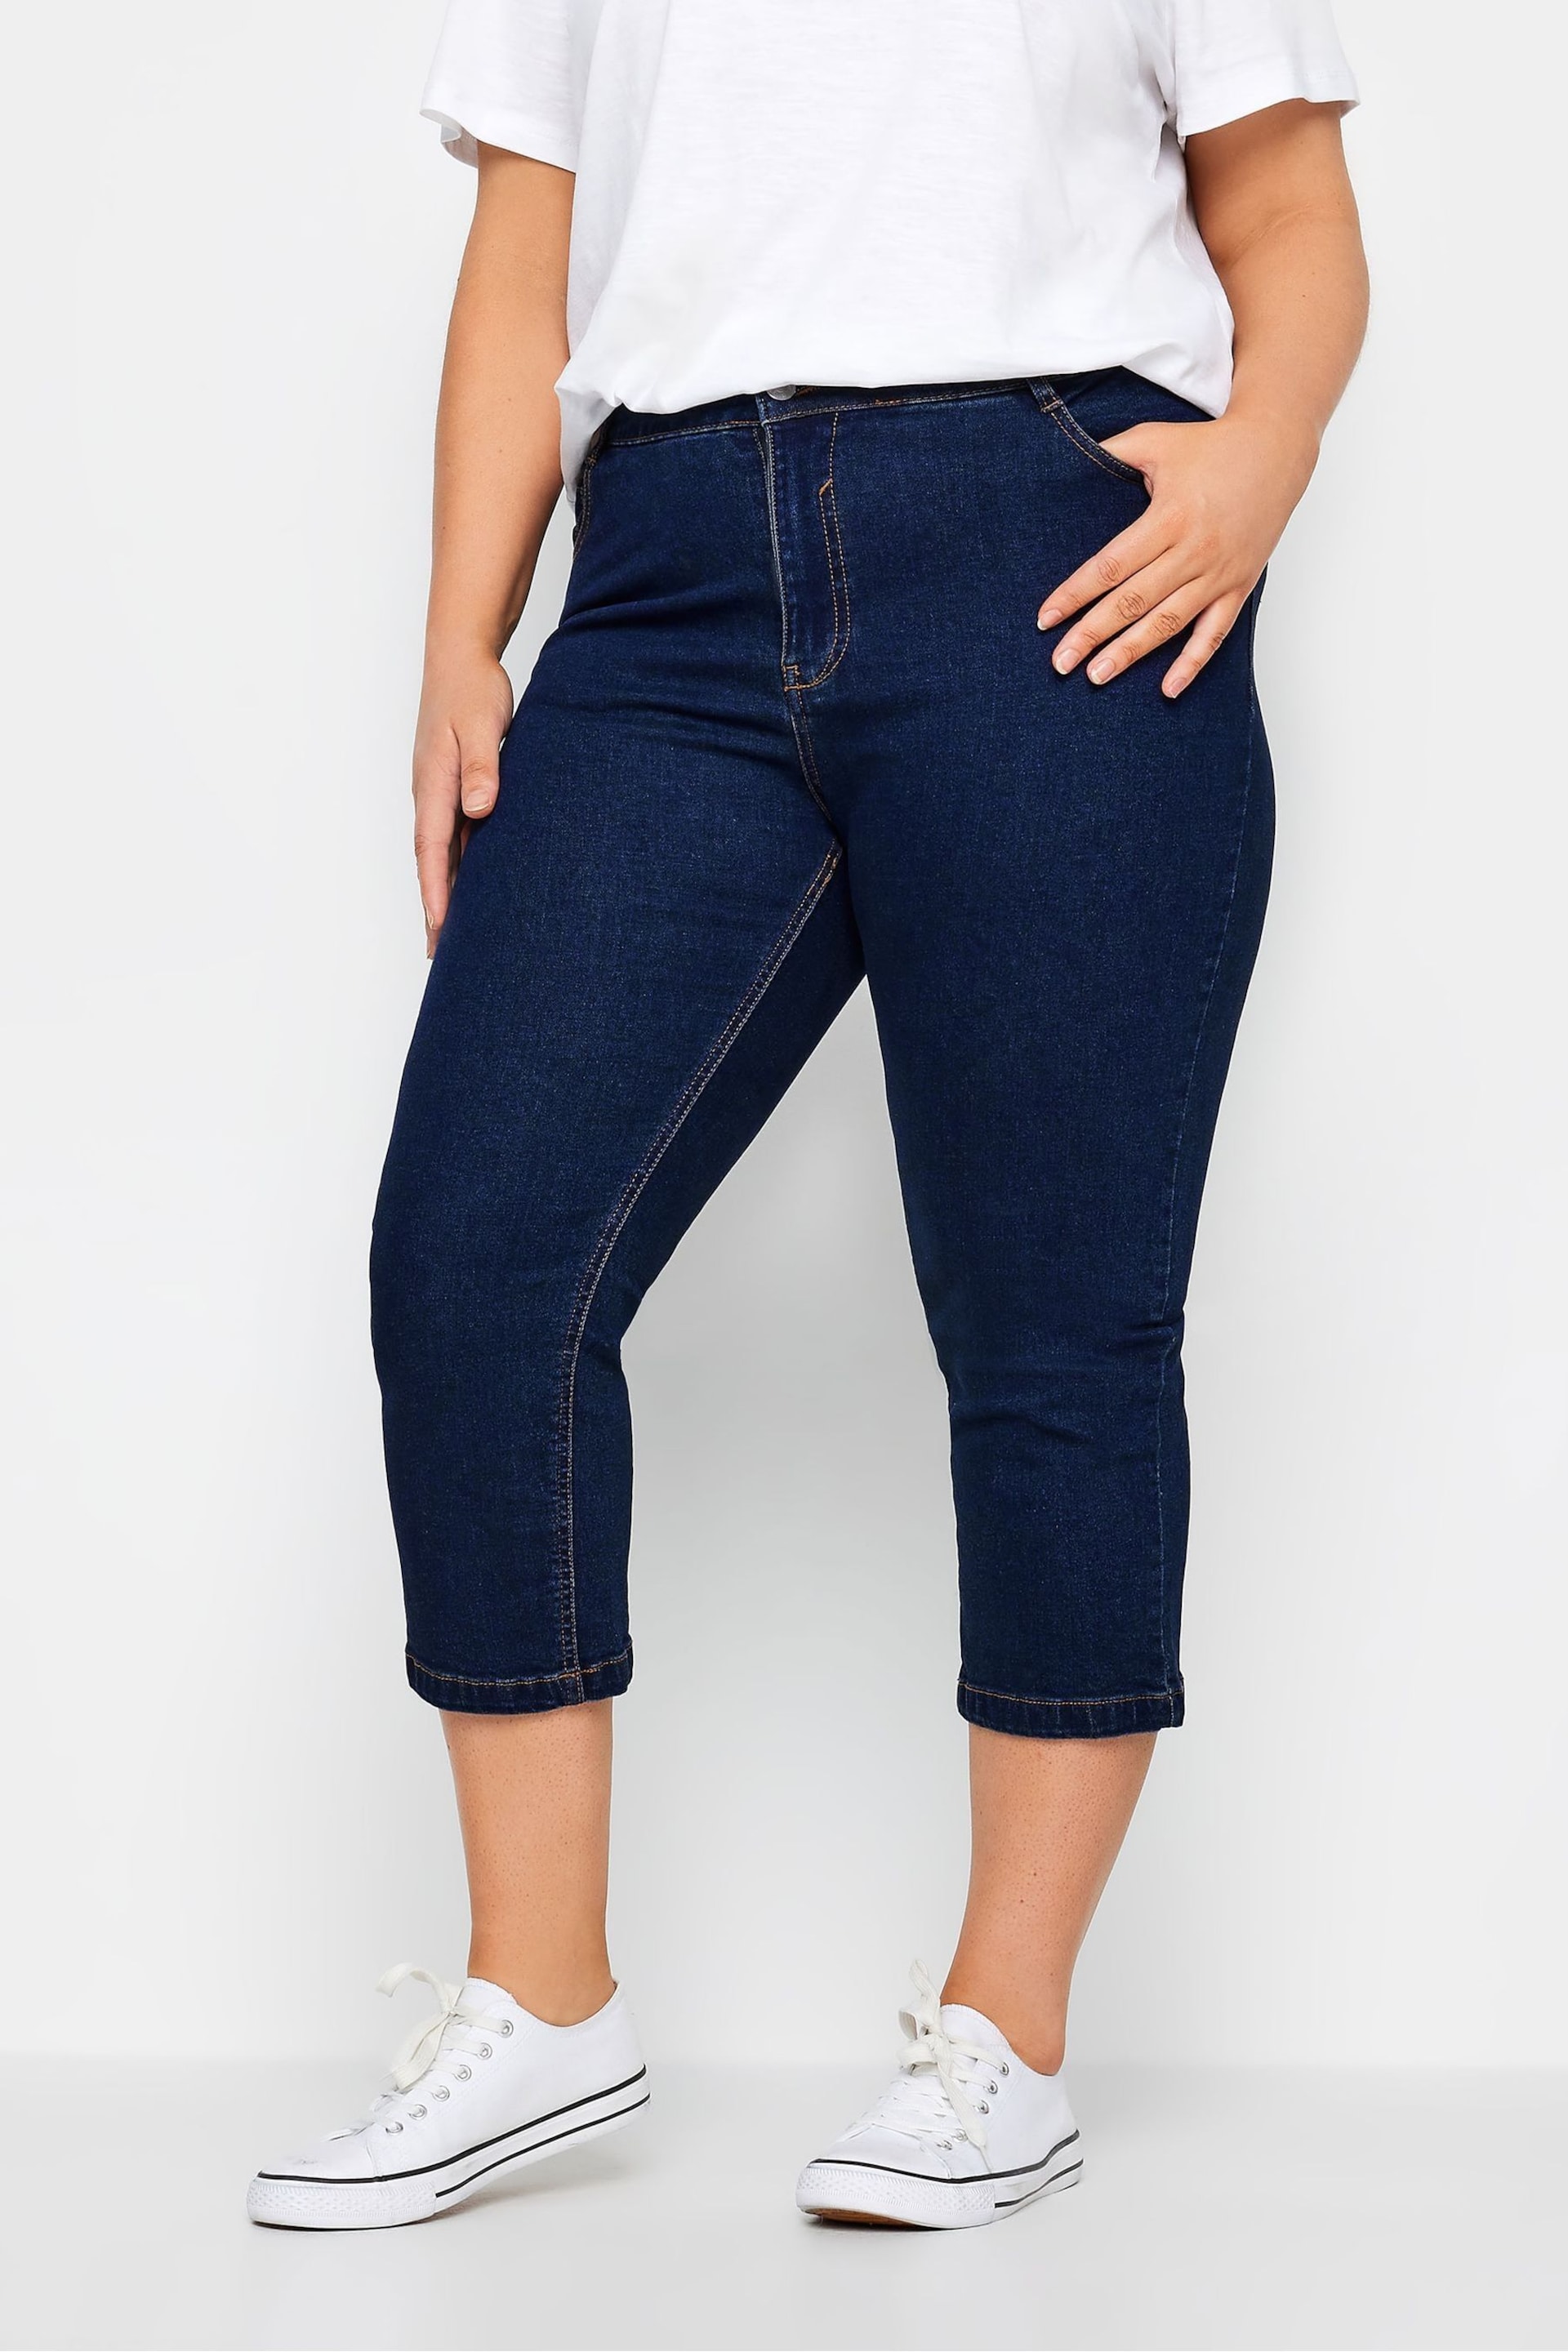 Cropped Jeans - Image 1 of 2